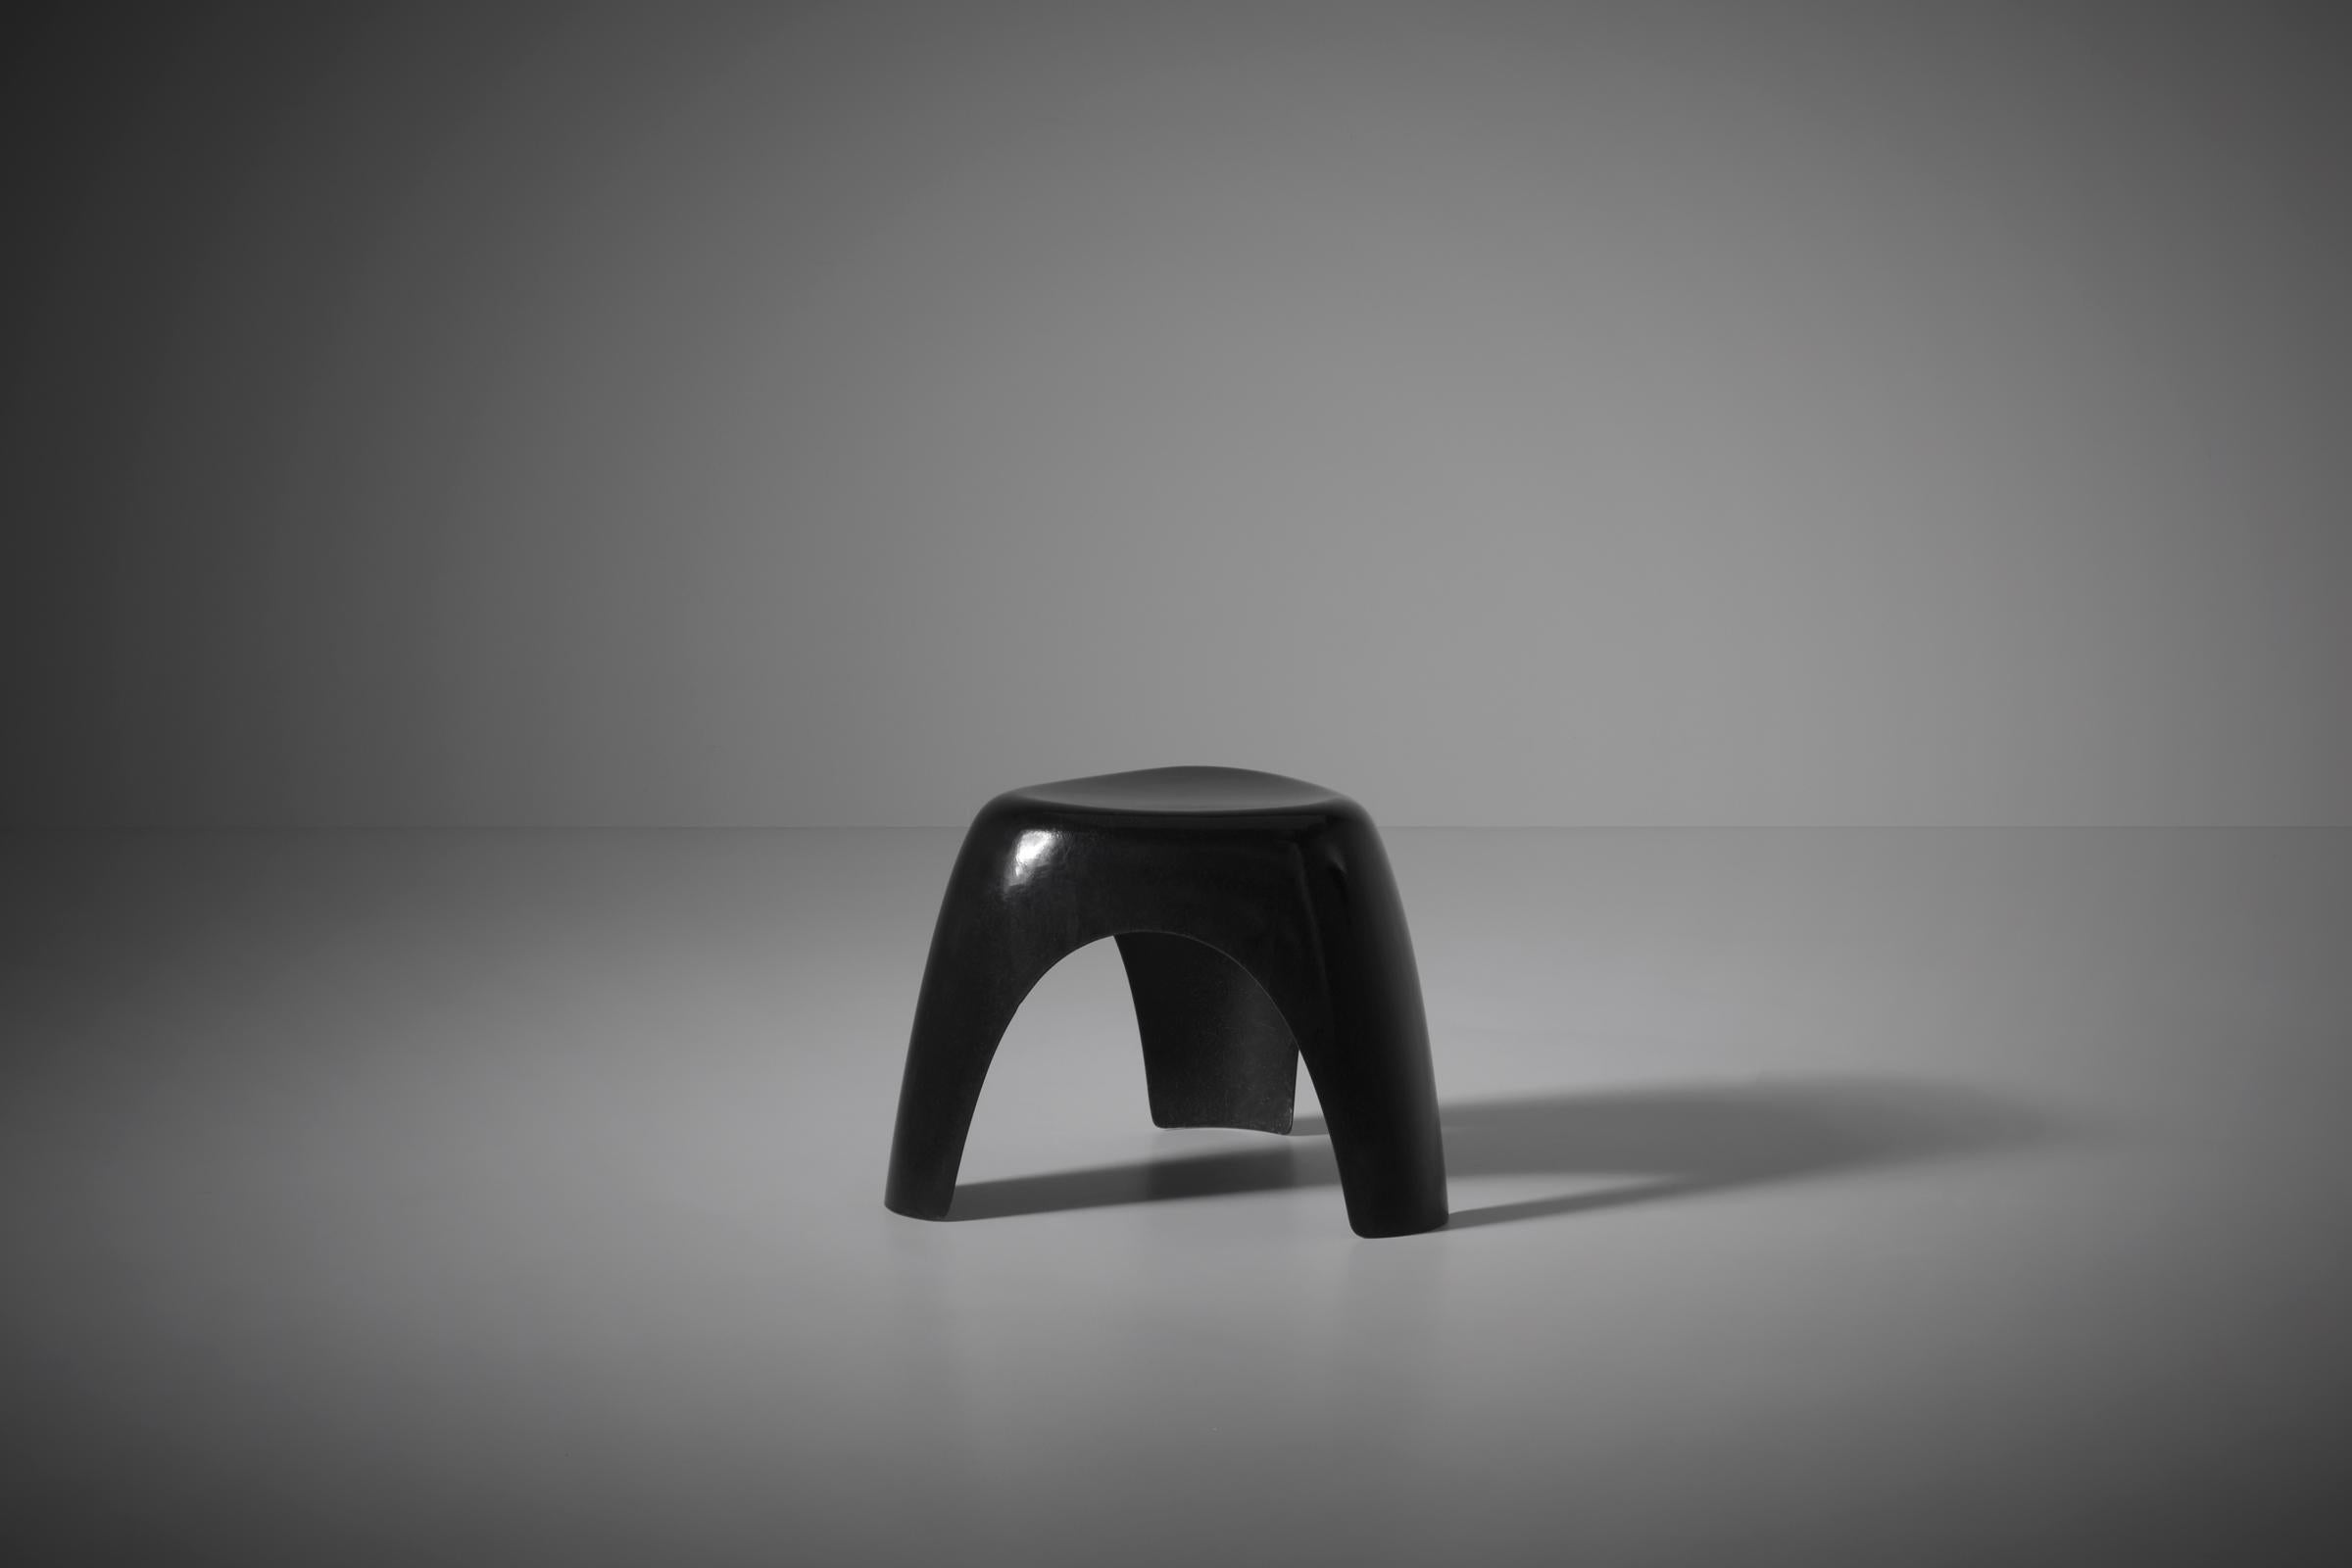 Elephant stool by Sori Yanagi for Kotobuki Seating Company, Tokyo Japan 1954. Yanagi originally designed the stool as a work chair for his studio, a couple of years later it was released by Kotobuki after the technology for producing fiberglass was